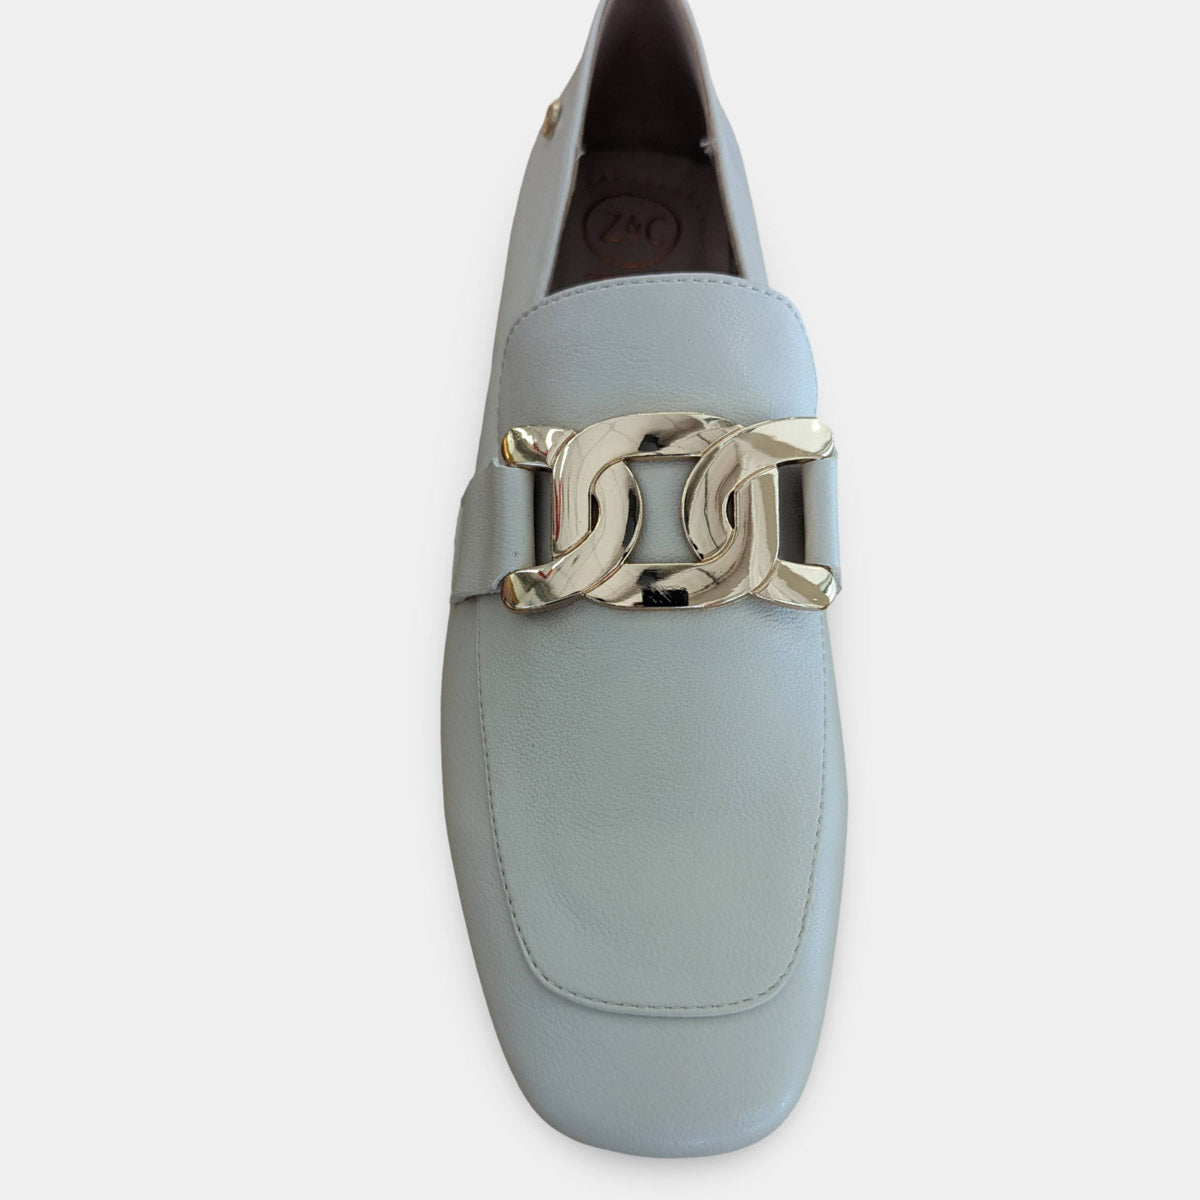 Zanni & Co Cream Square Toe Loafers with Gold Chain Detail and Stylish Heel